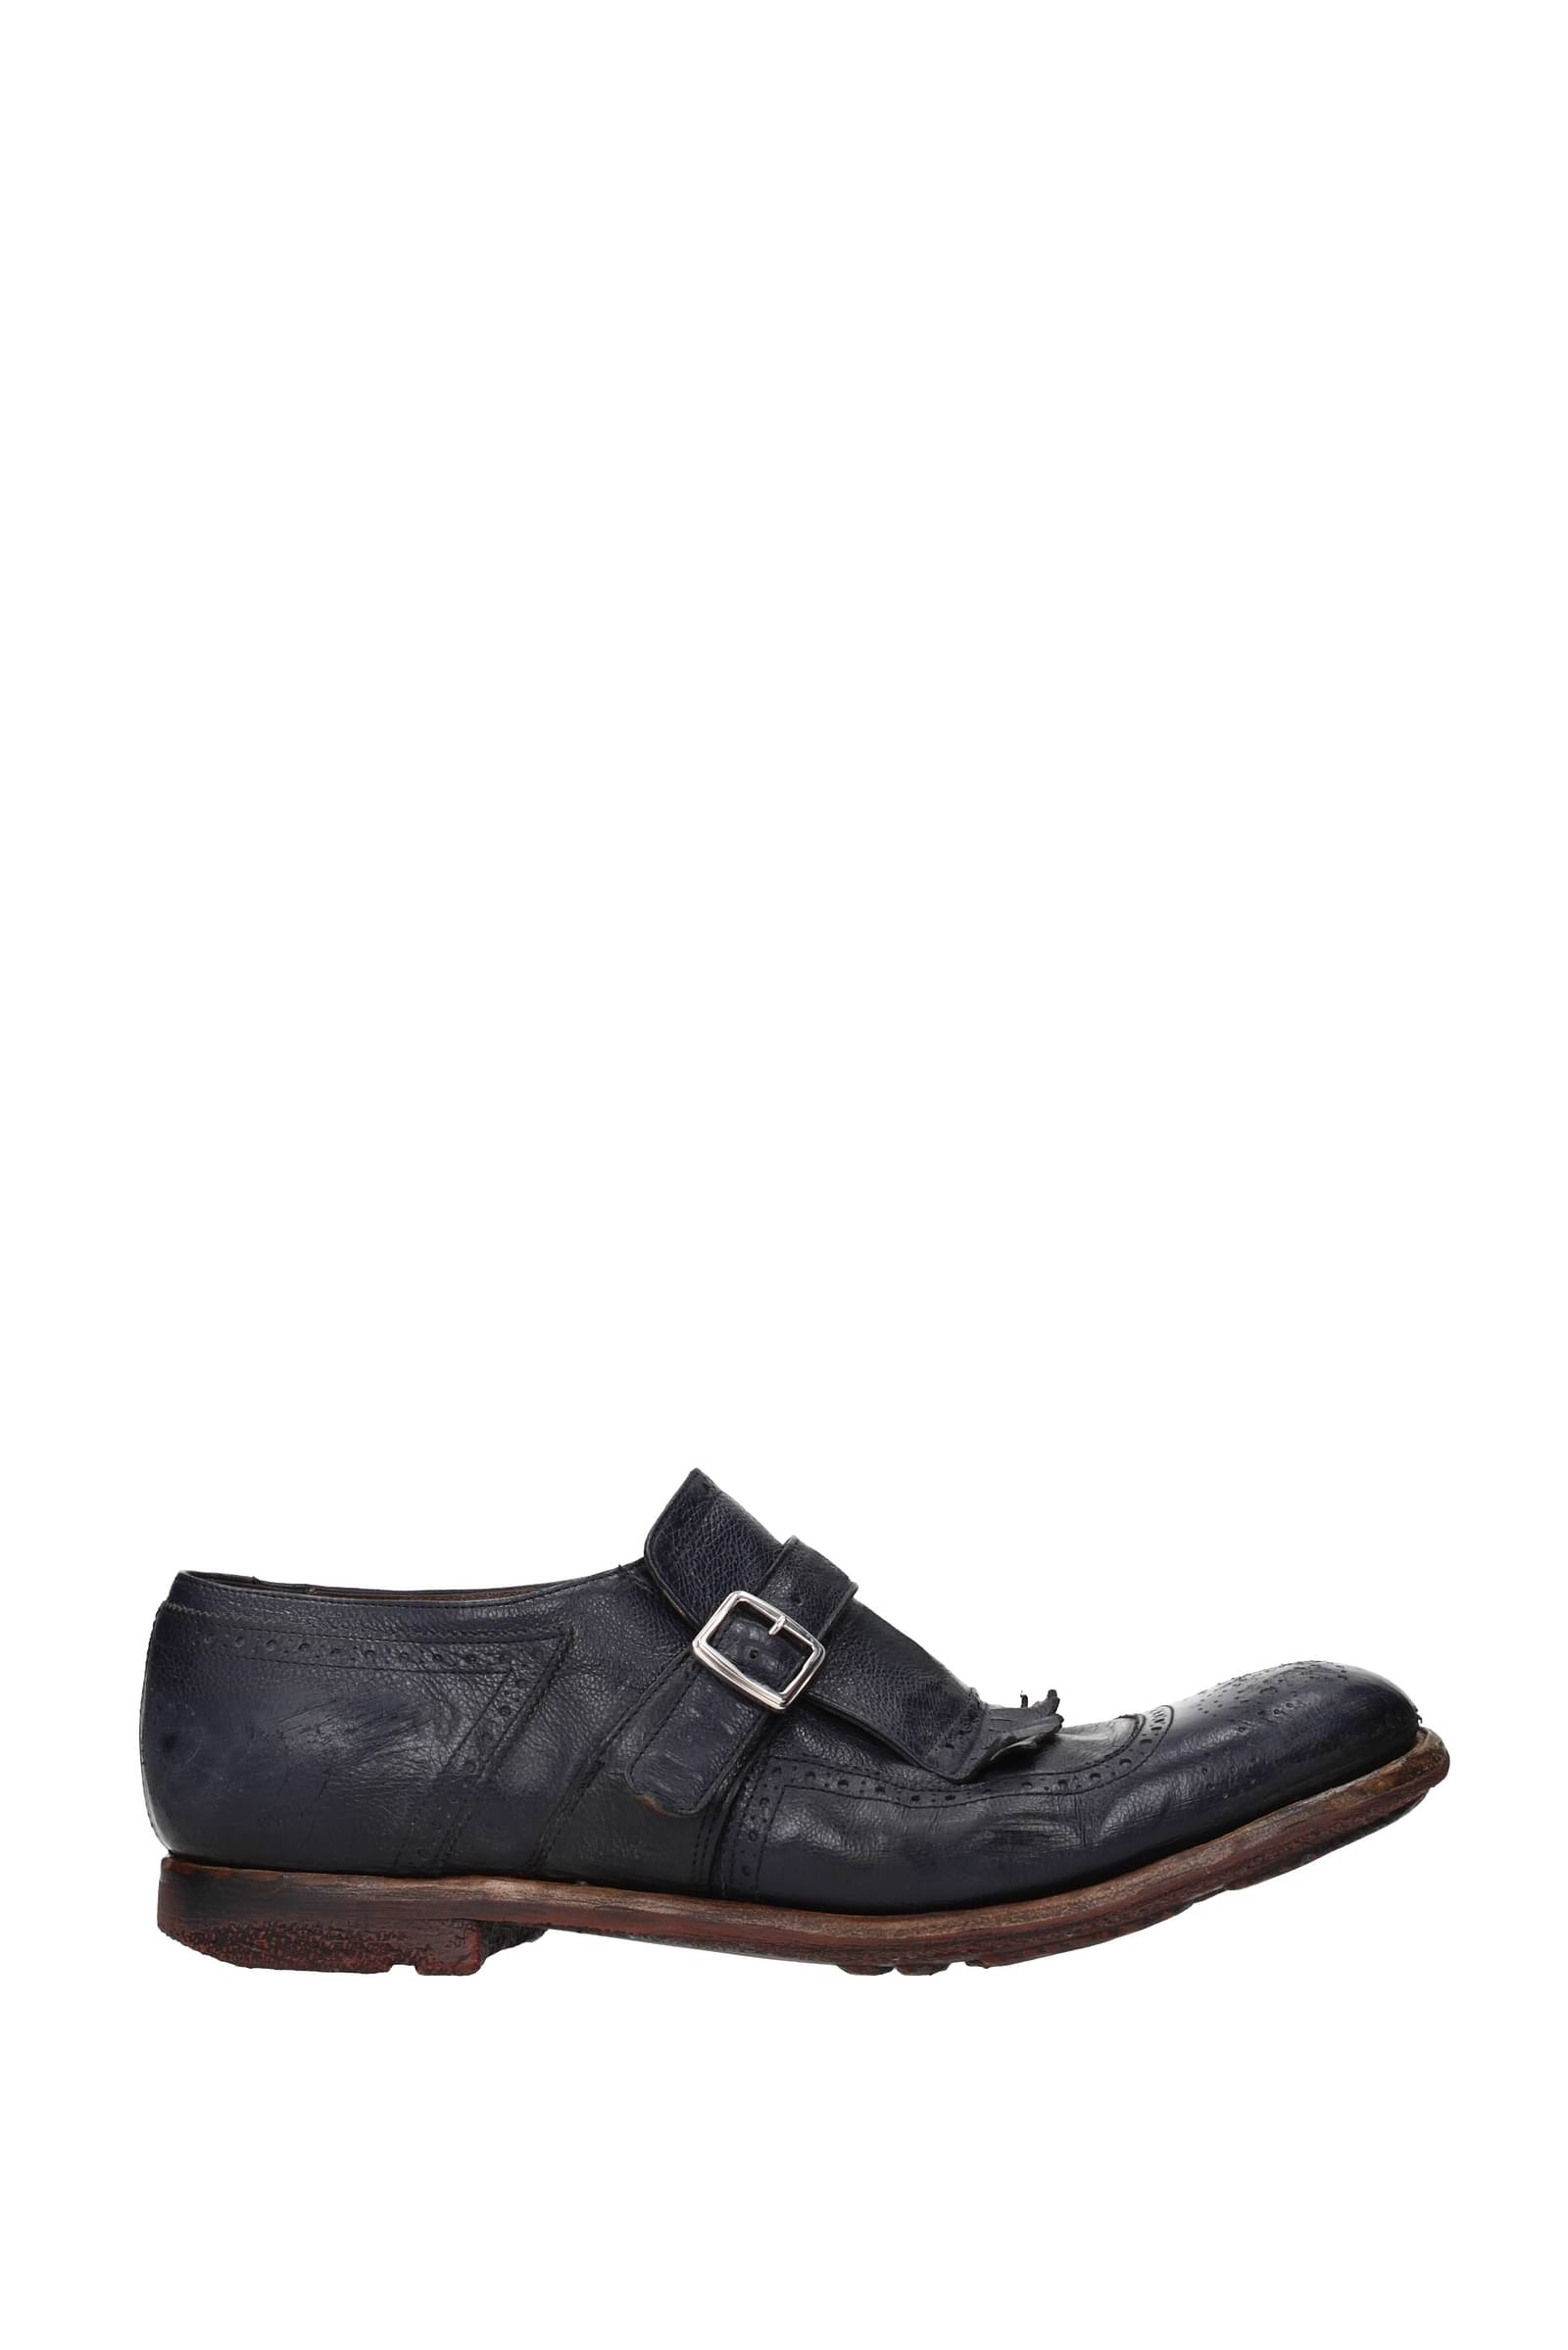 Dolce&Gabbana Lace up and Monkstrap Men A20159A120380999 Leather ...